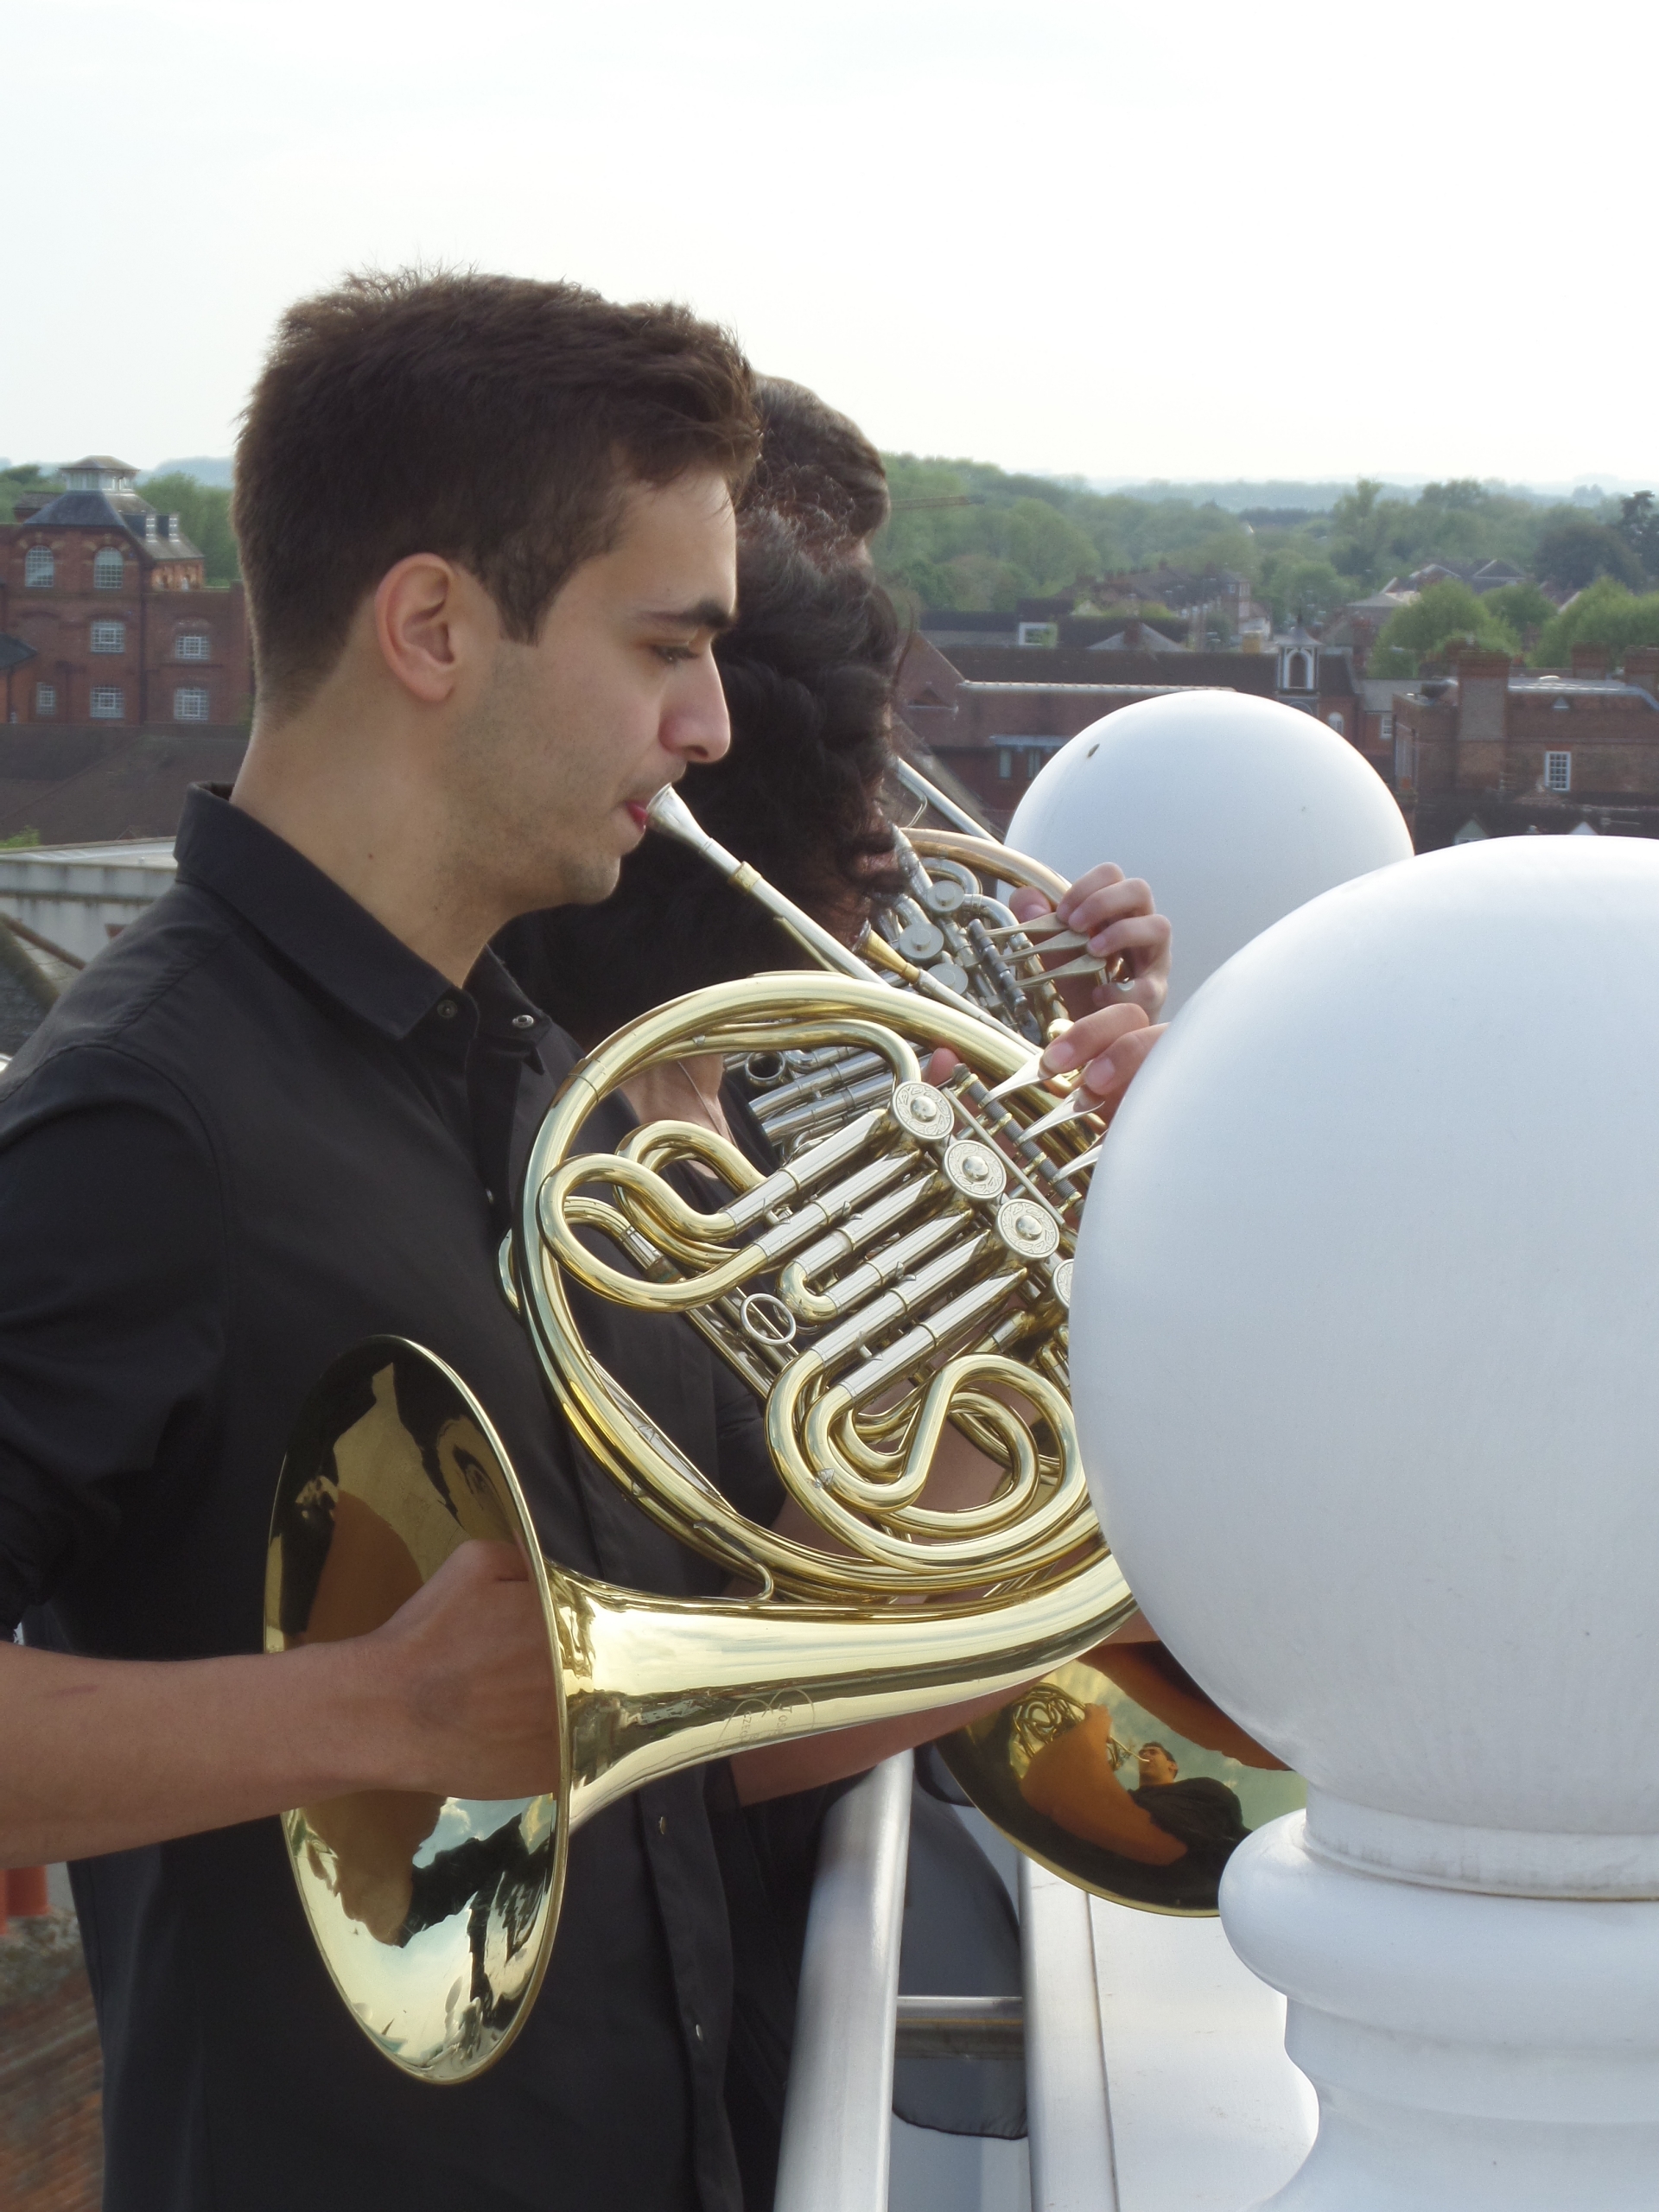 Horn call from the county hall roof 16 May